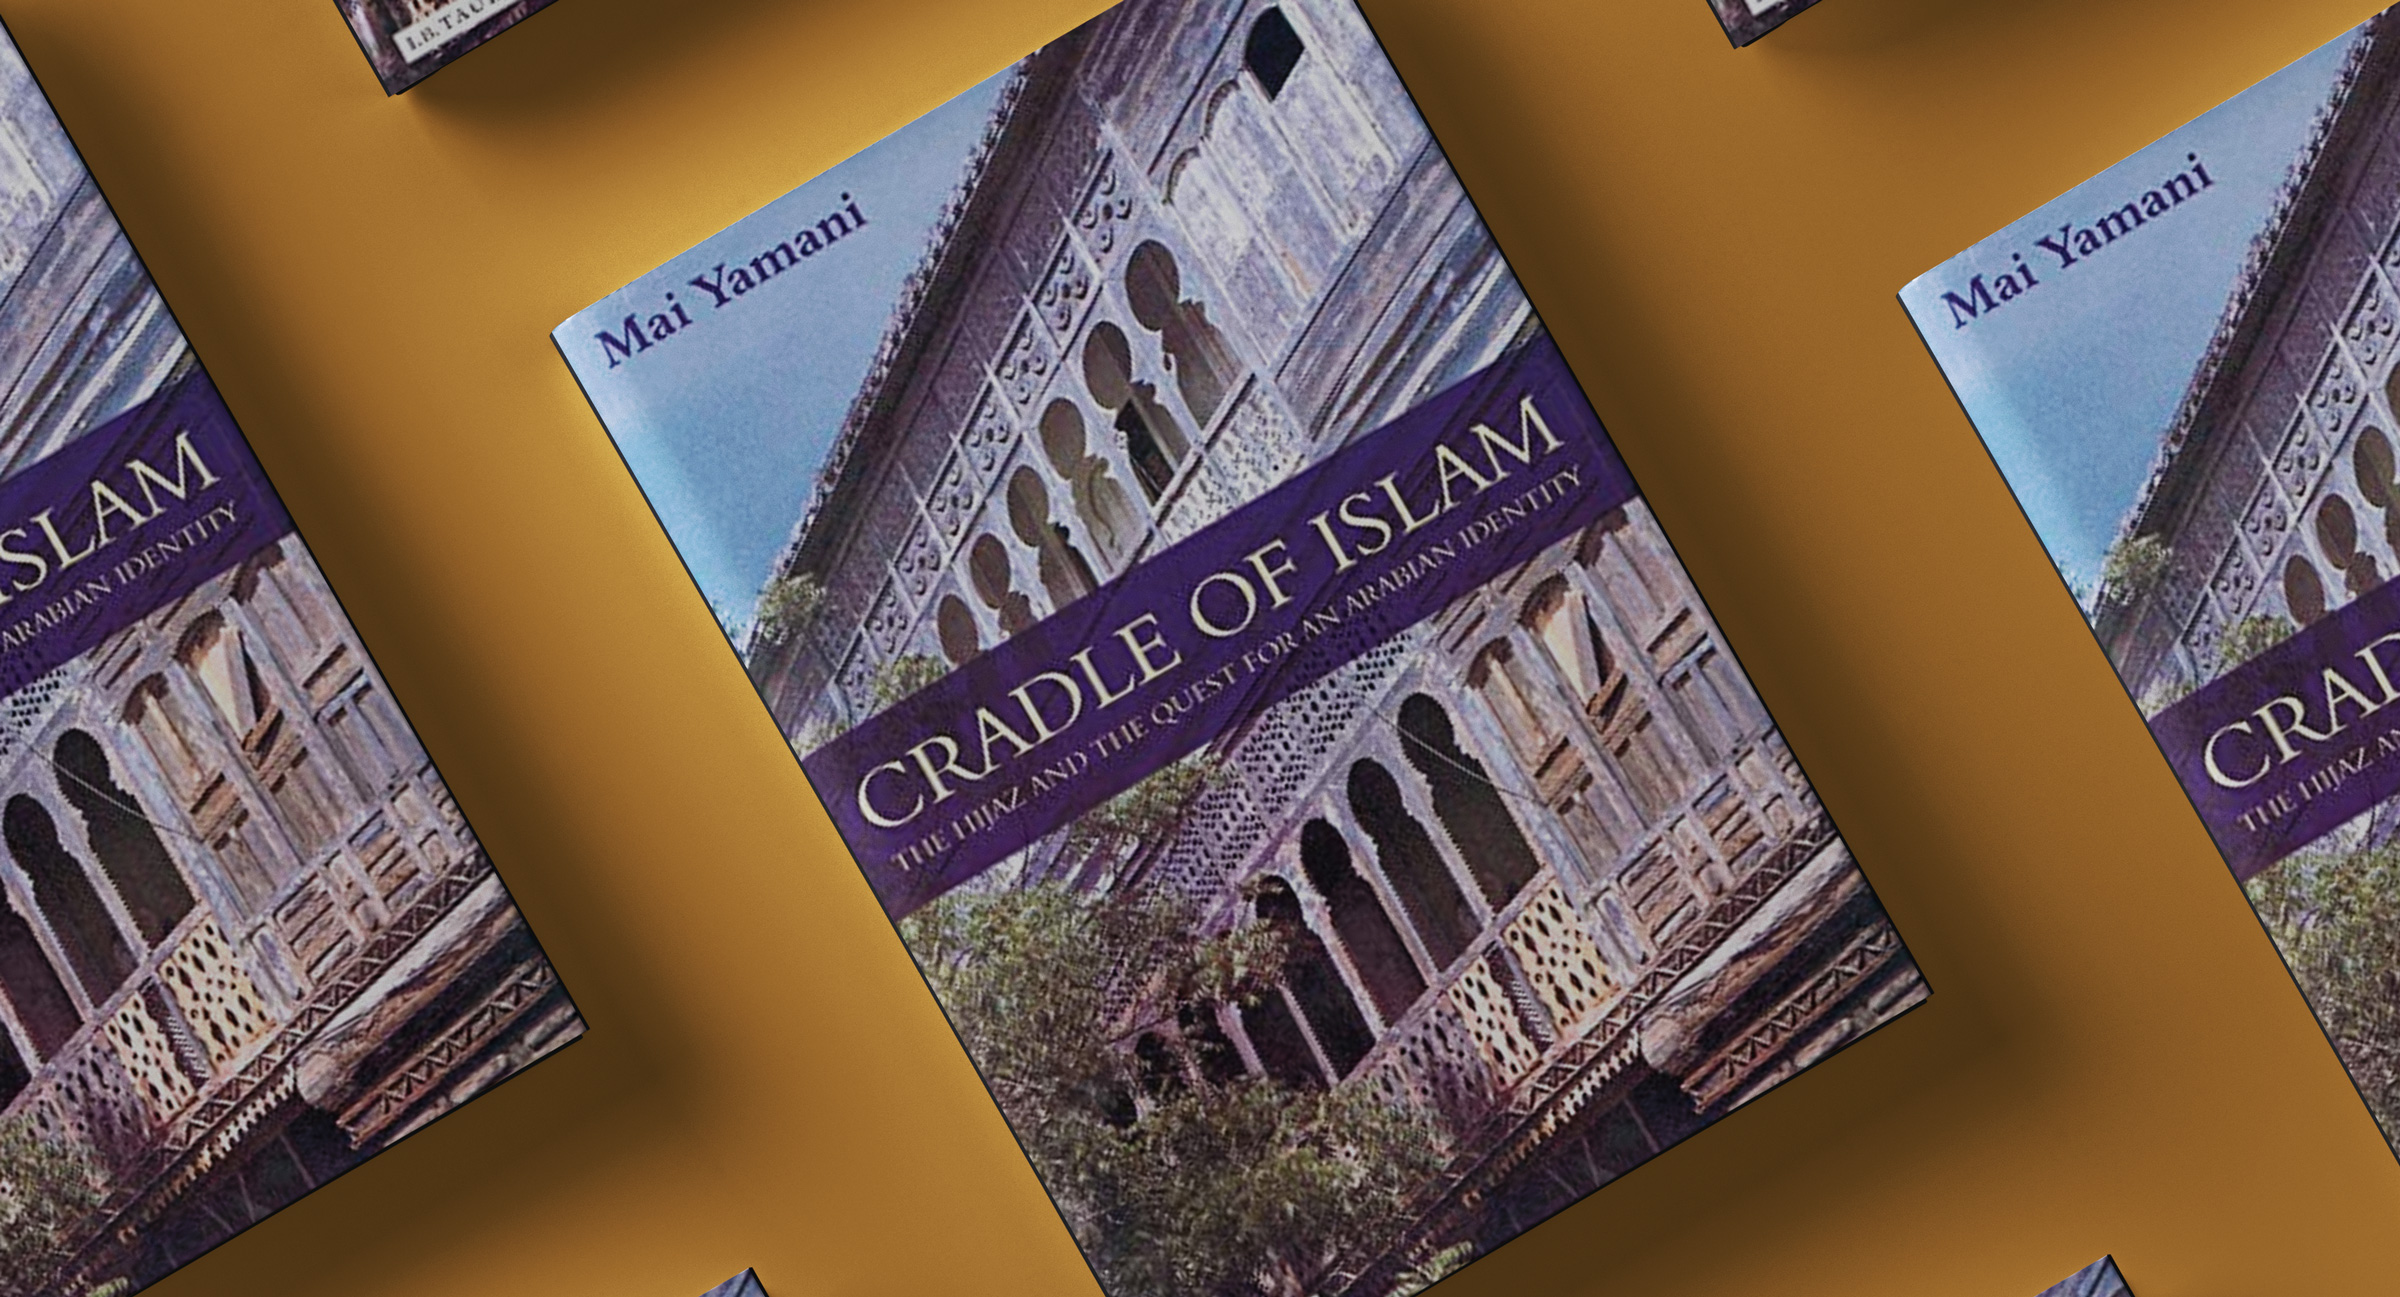 Image of several copies of Cradle of Islam book